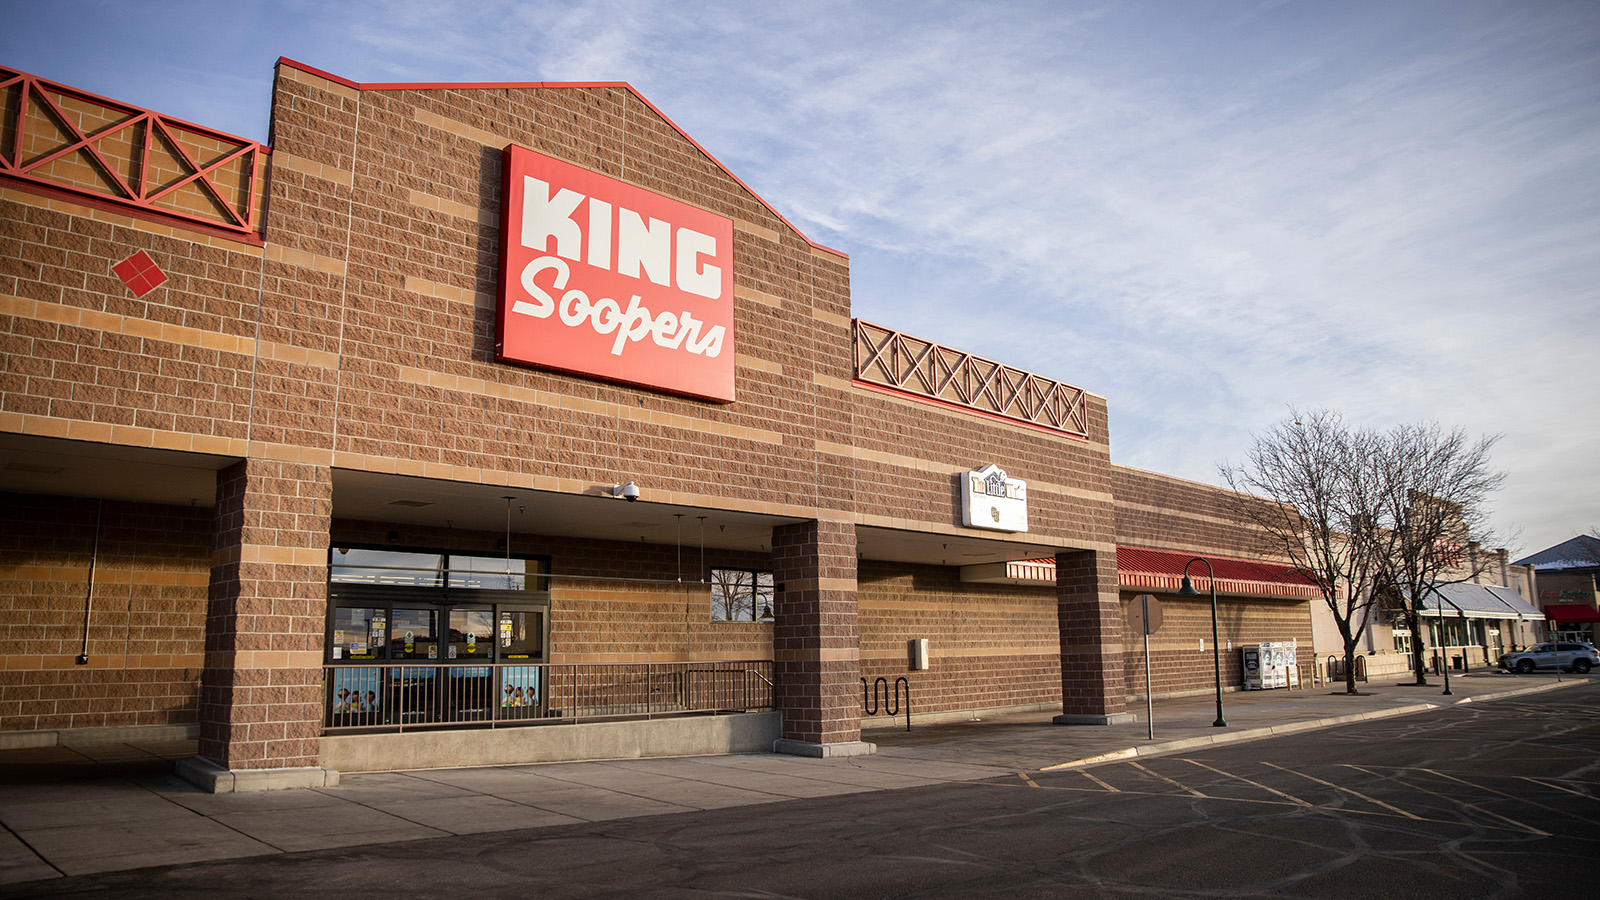 Union rejects “best, latest” offer from King Soopers;  Strike is imminent – CBS Denver